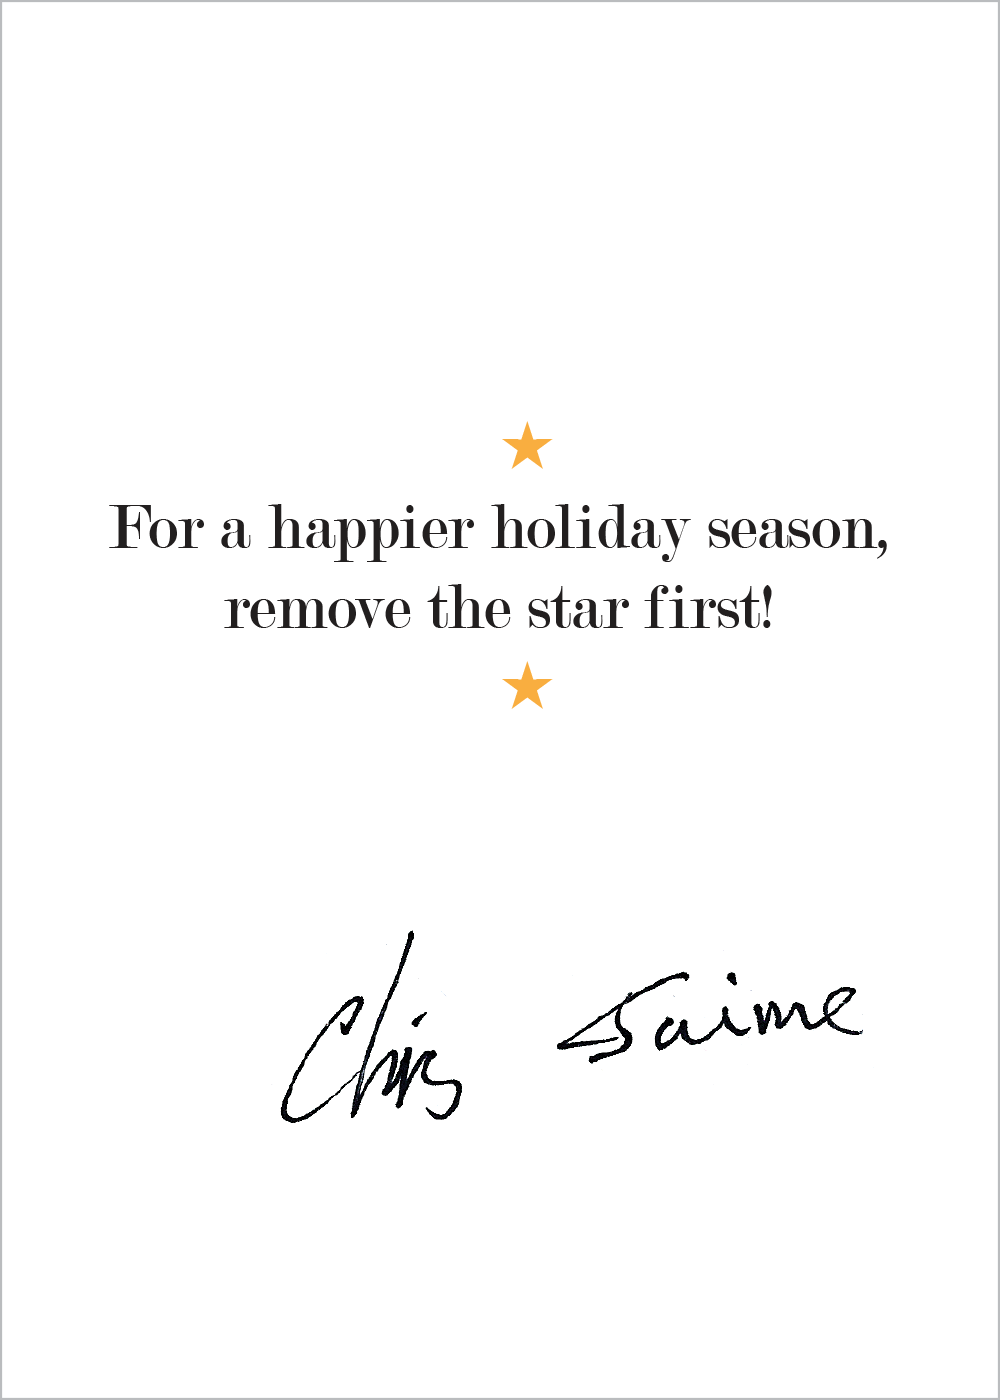 Interior of card: "For a happier holiday season, remove the star first!" with two signatures